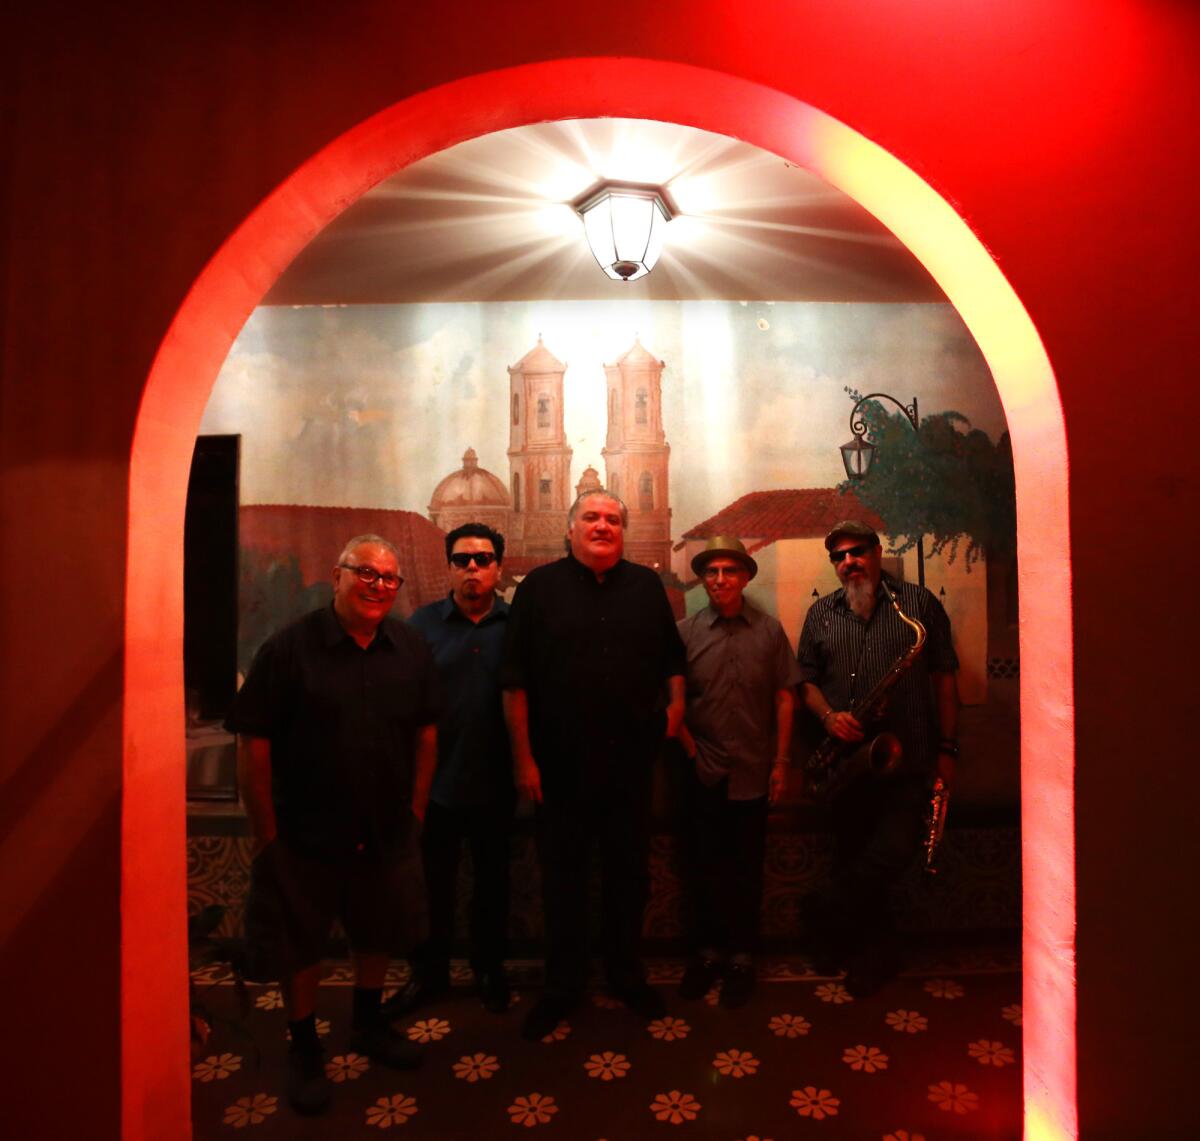 EAST LOS ANGELES, CA - SEPTEMBER 29, 2015 -- Los Lobos members Conrad Lozano, from left, Cesar Rosas, David Hidalgo, Louie Perez and Steve Berlin pose for a portrait before performing an intimate concert for family and friends to celebrate their new album, "Gates of Gold," at El Gallo Plaza in East Los Angeles on September 29, 2015. (Genaro Molina/ Los Angeles Times)